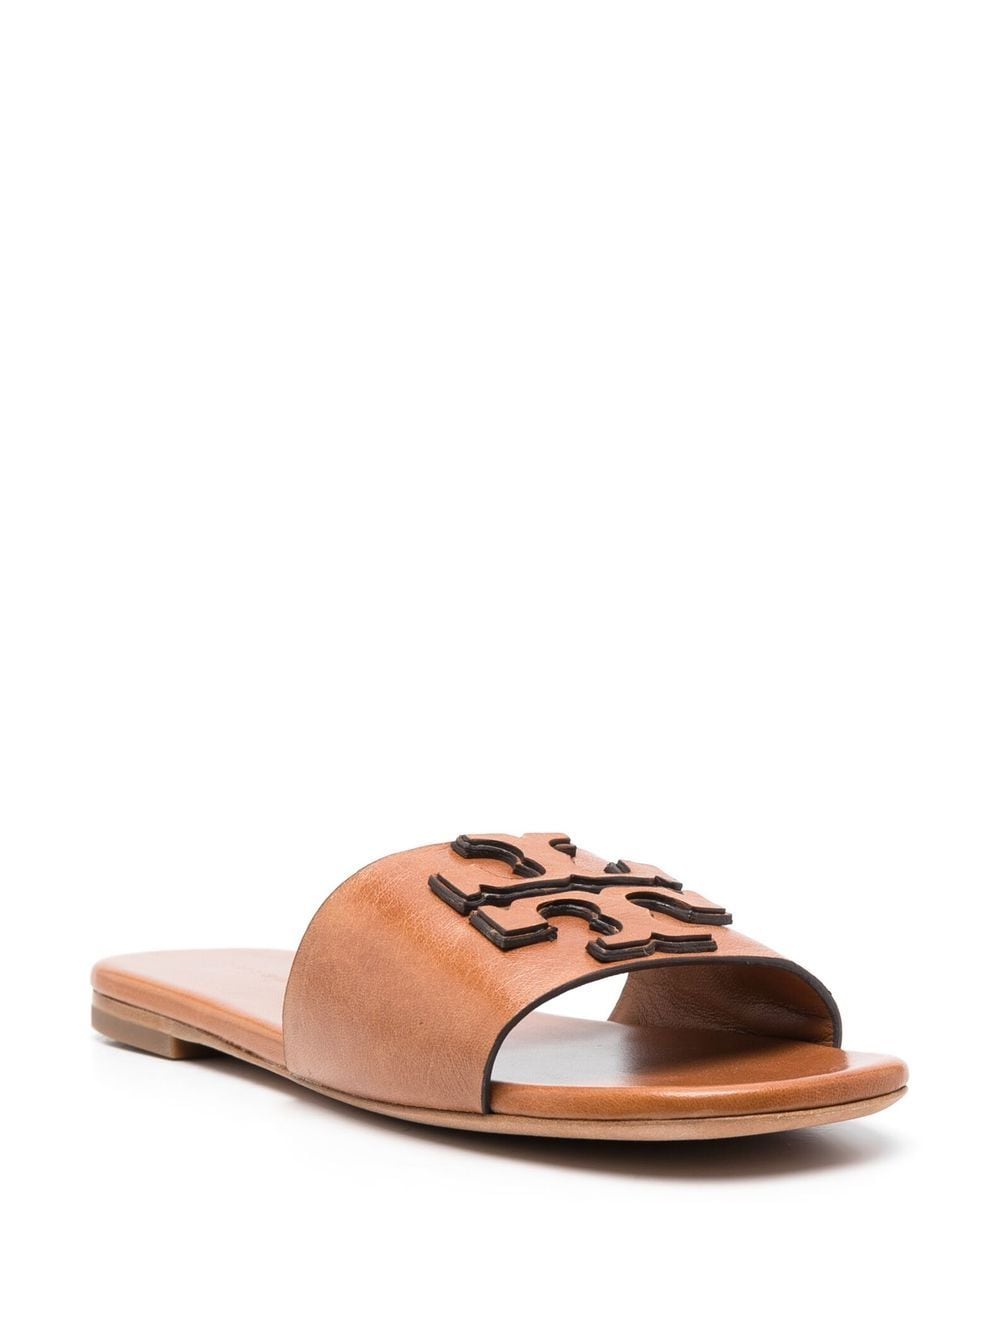 Tory Burch Sandals Leather Brown